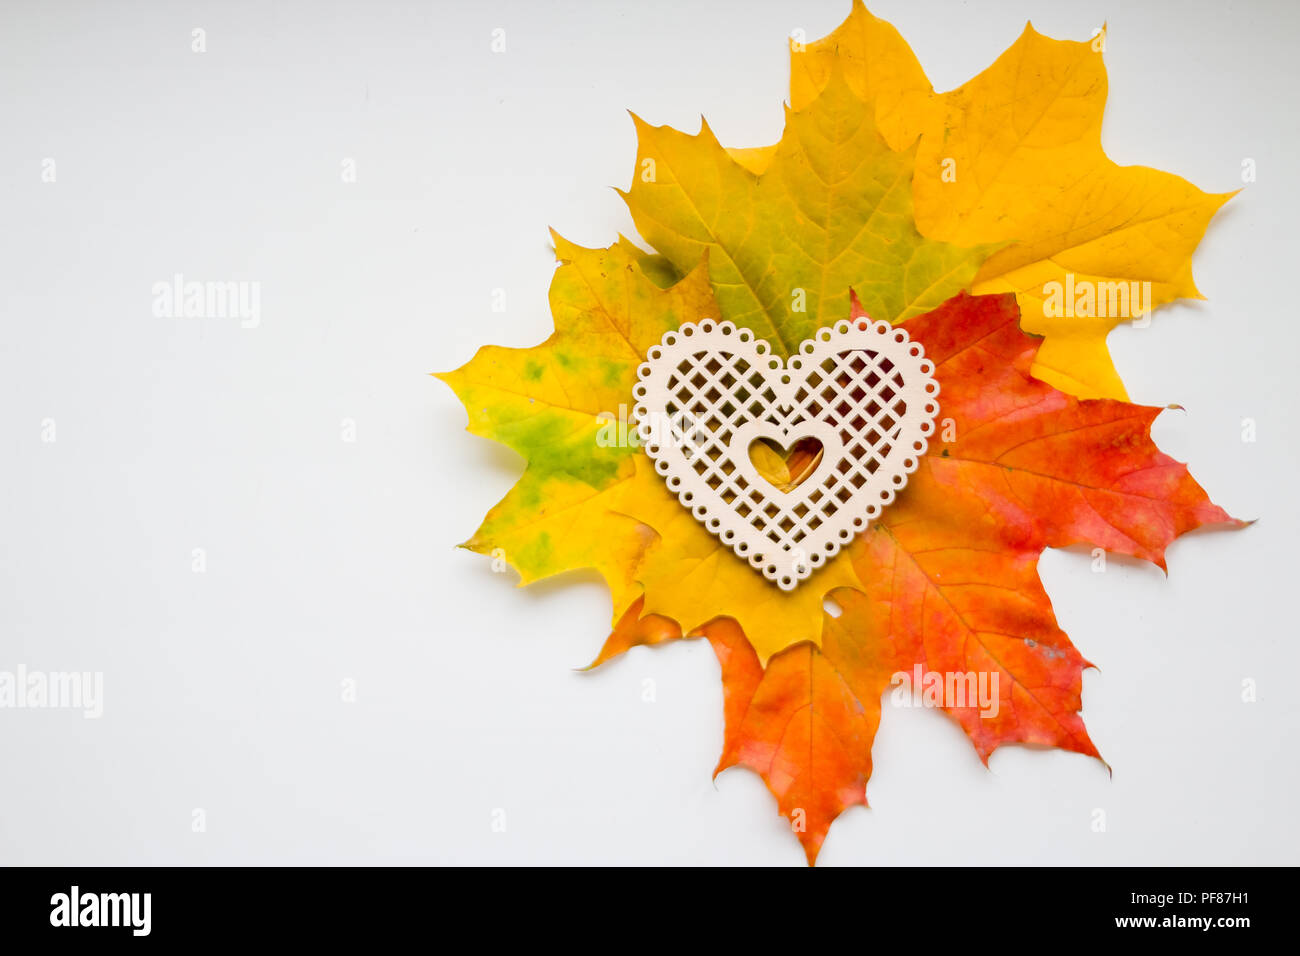 wedding decorations in the autumn.Autumn still life with colorful fall leaves and wooden heart over white background. Fall nature background.cozy autumn still life, autumn mood concept, blogger or writer lifestyle, top view. Stock Photo